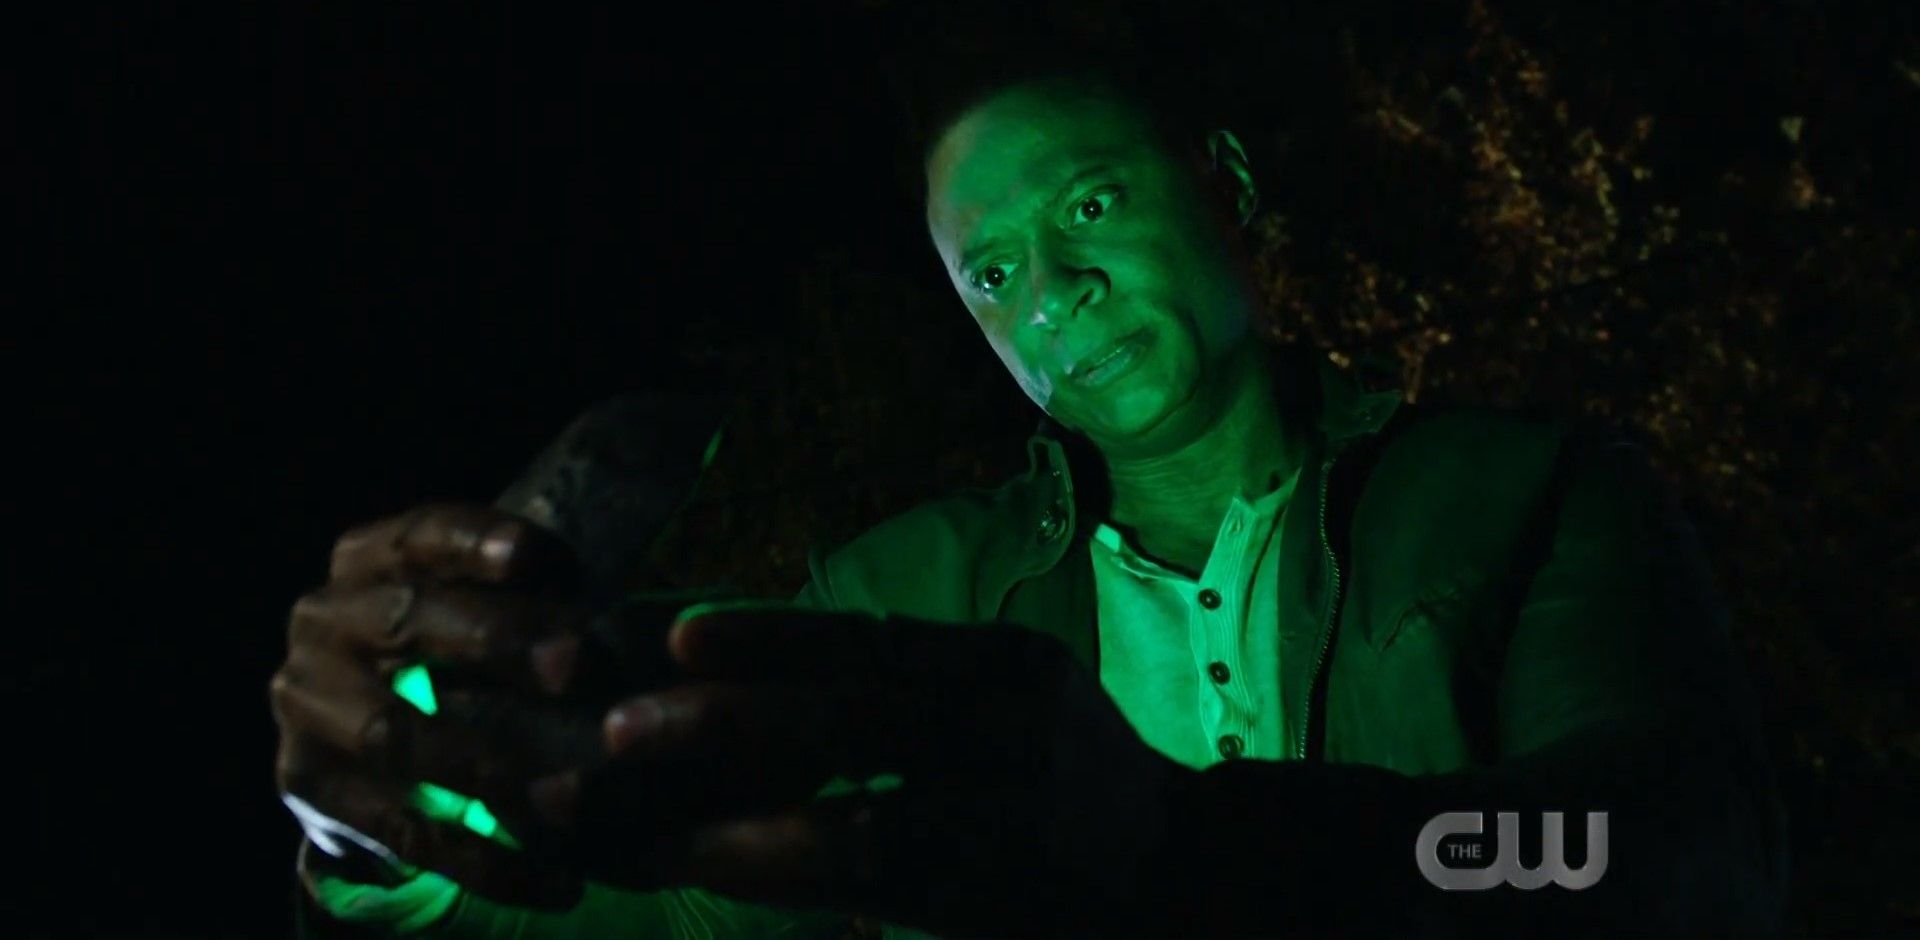 John Diggle looking at a box with a Green Lantern ring inside it.